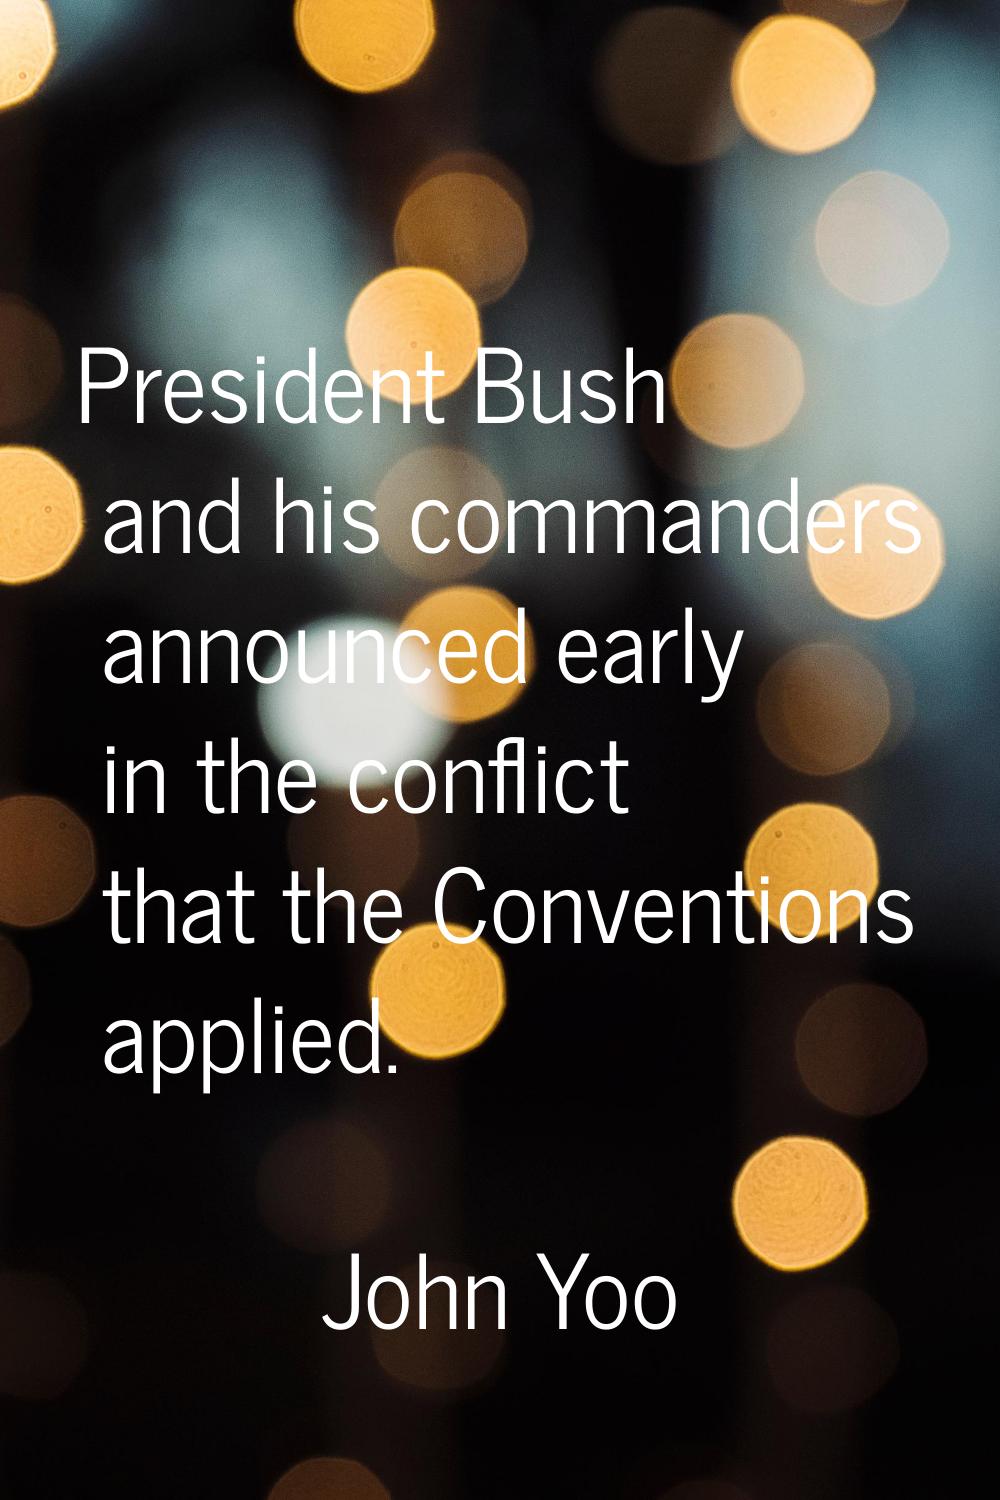 President Bush and his commanders announced early in the conflict that the Conventions applied.